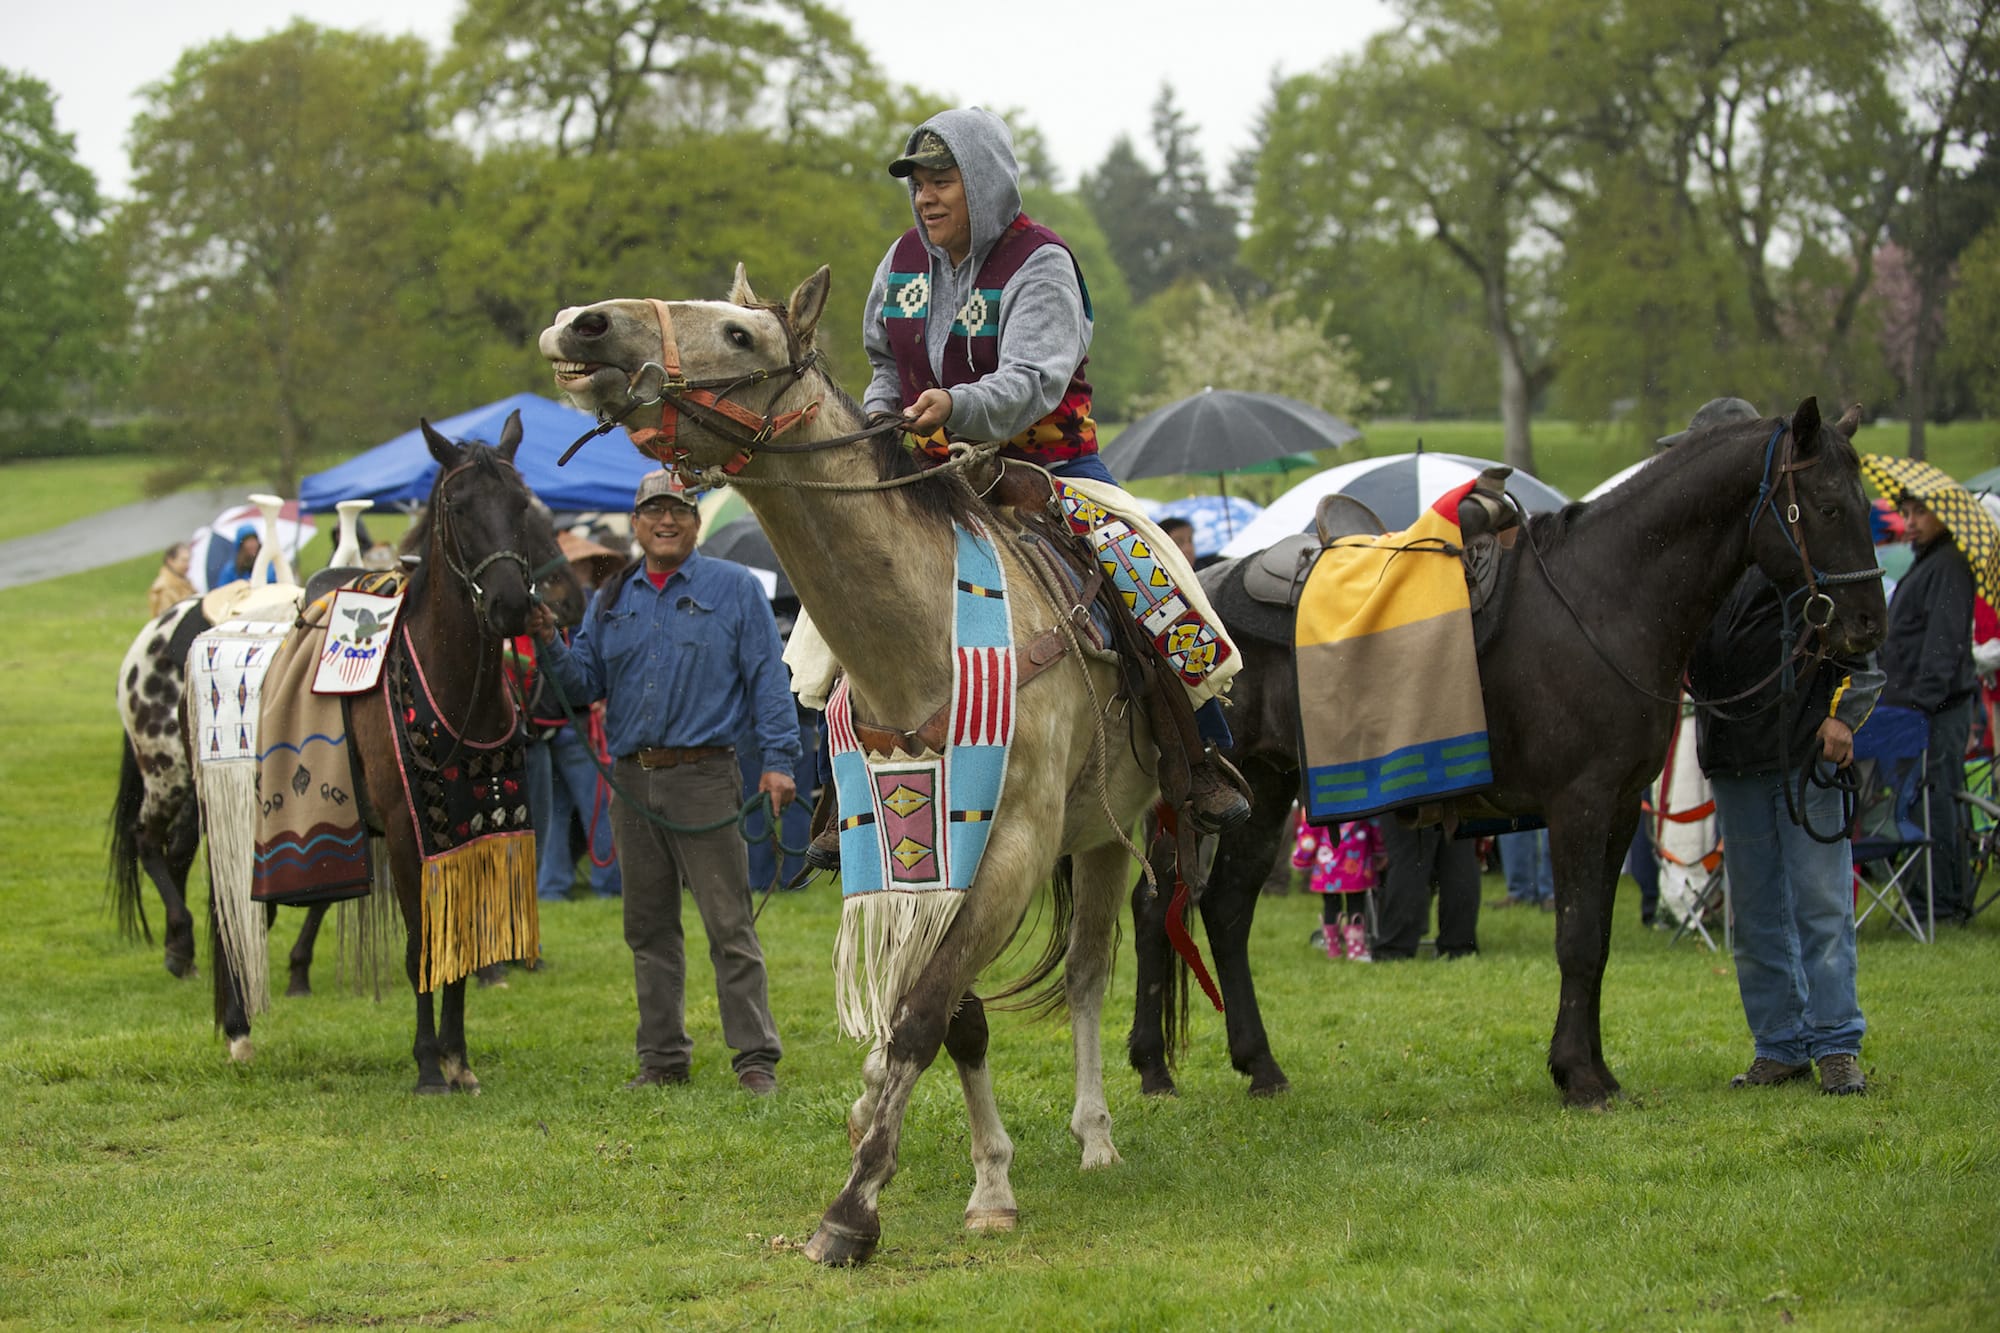 Four horses are lead around the crowd during the Riderless Horse Ceremony at the 17th Annual Nez Perce Chief Redheart Memorial Ceremony at the Fort Vancouver National Historic Site on Saturday.